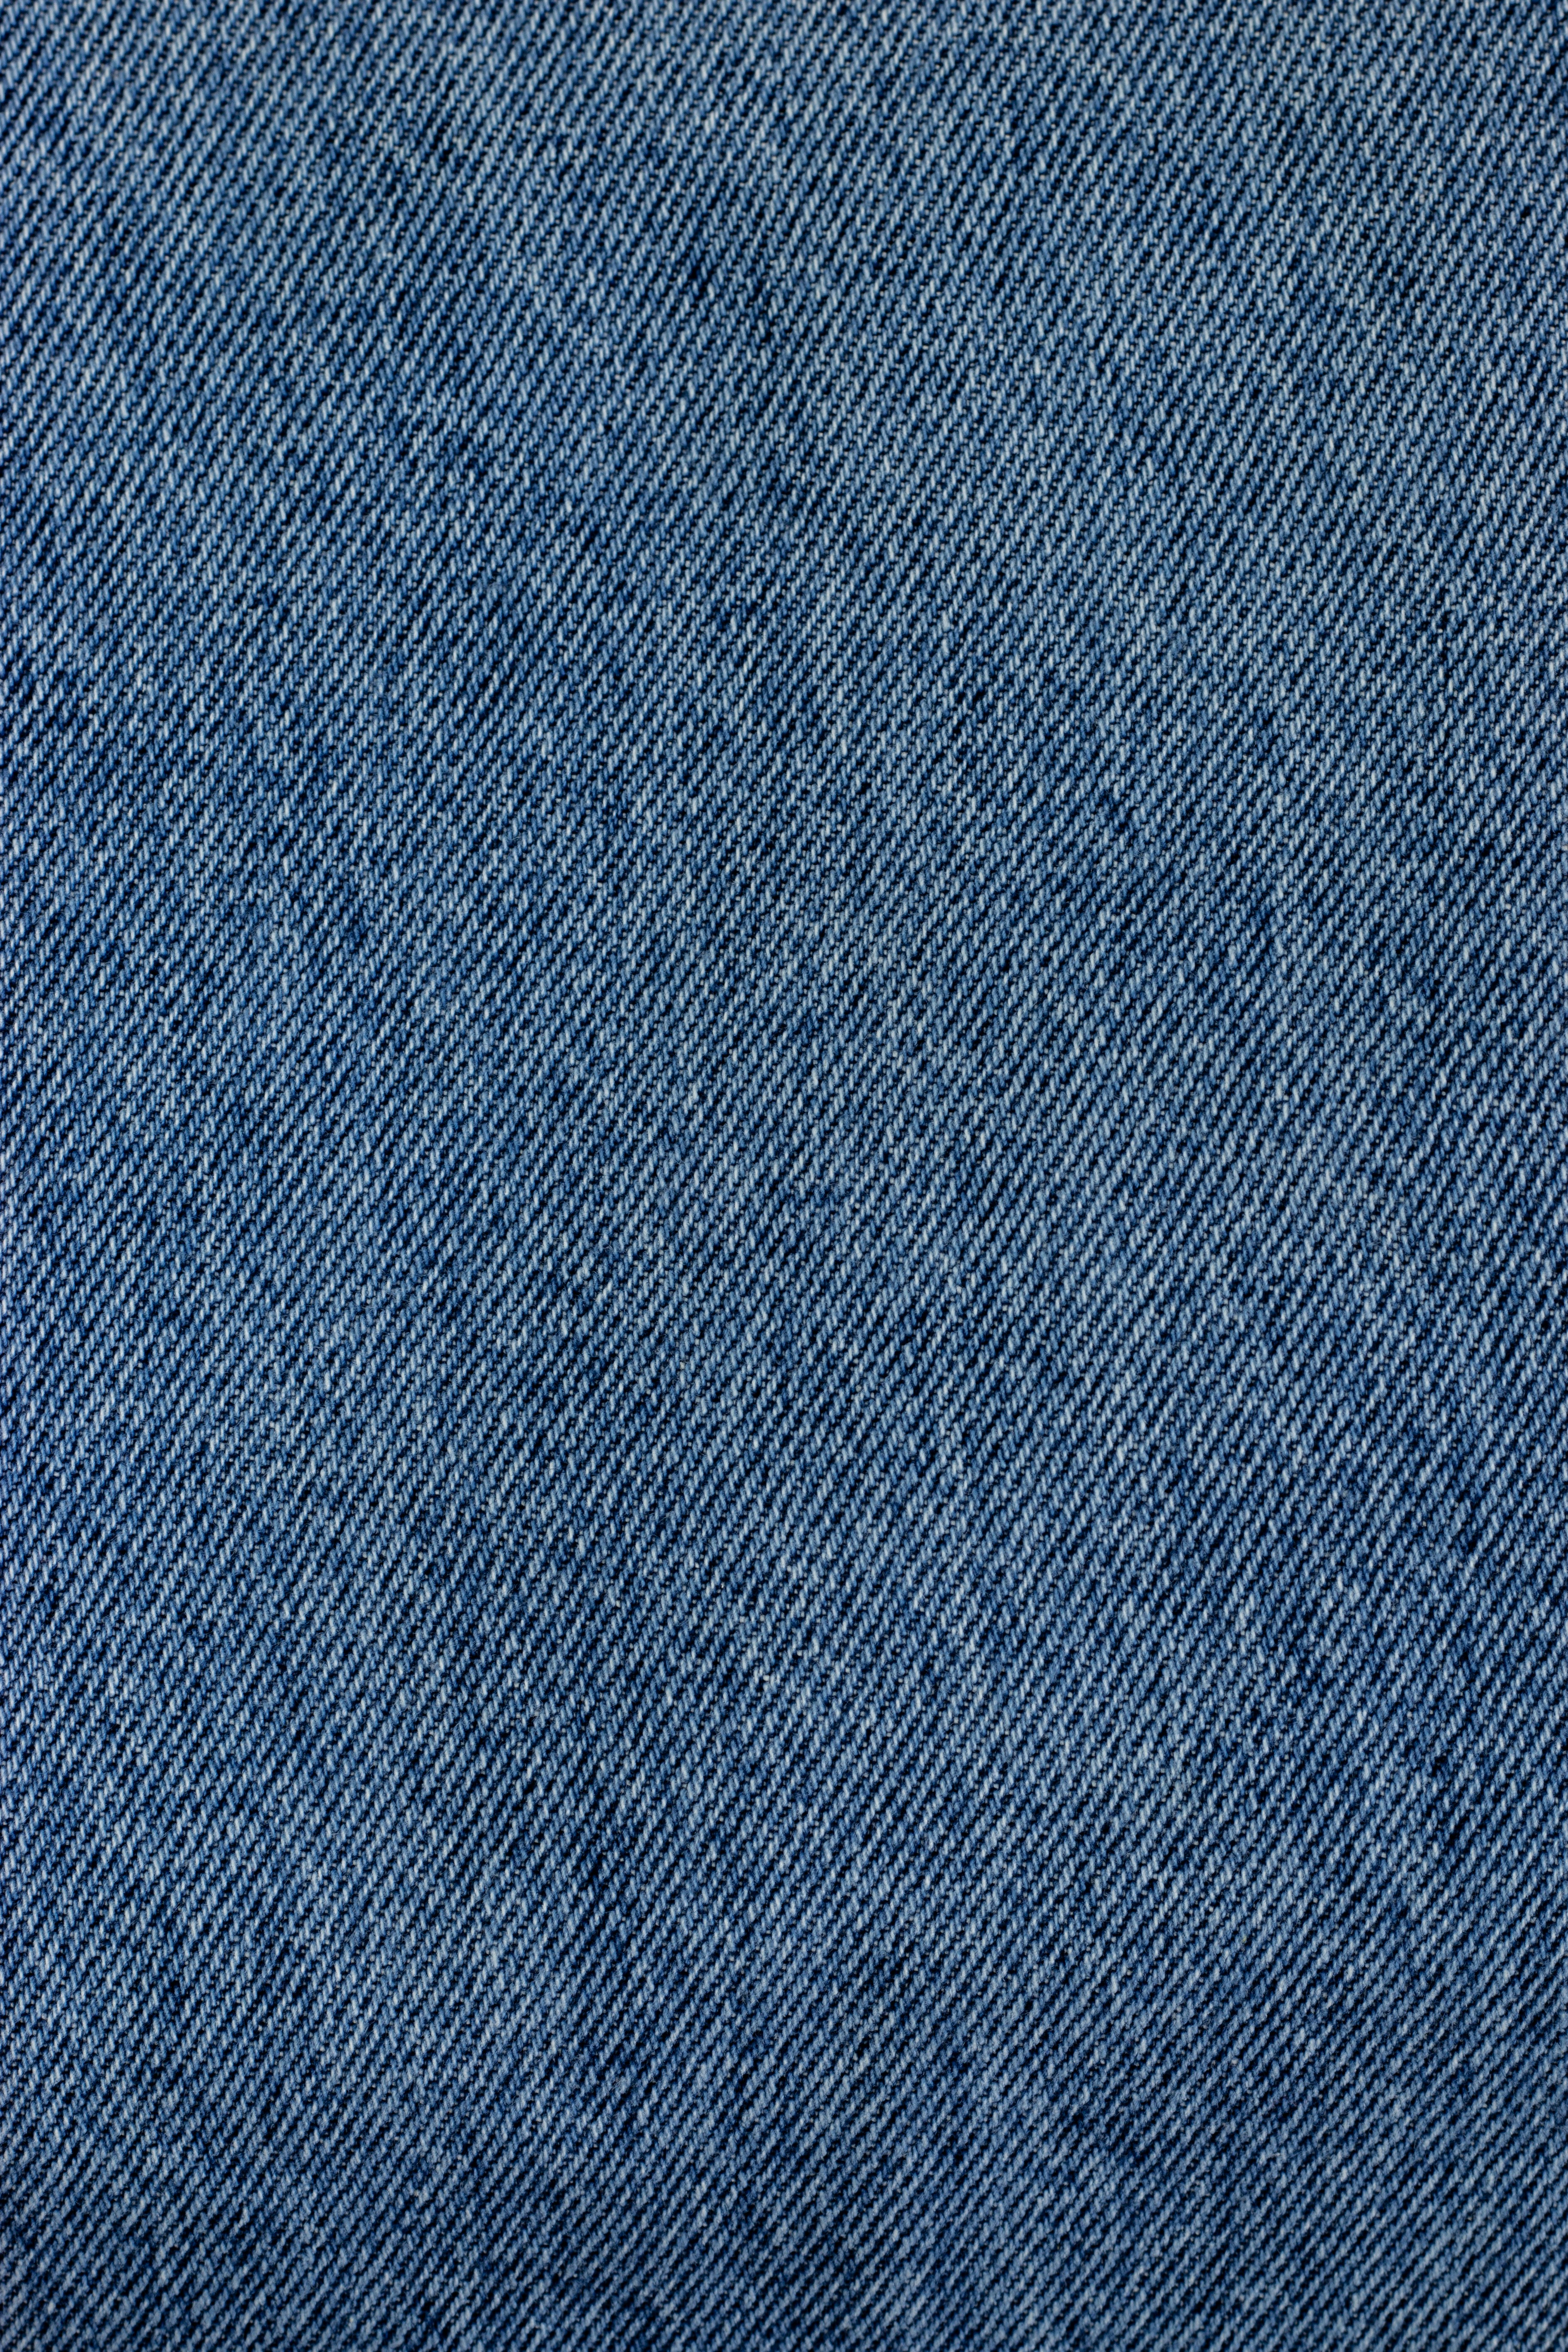 How Do I Care For And Wash A Long Jean Skirt To Keep It In Good Condition?